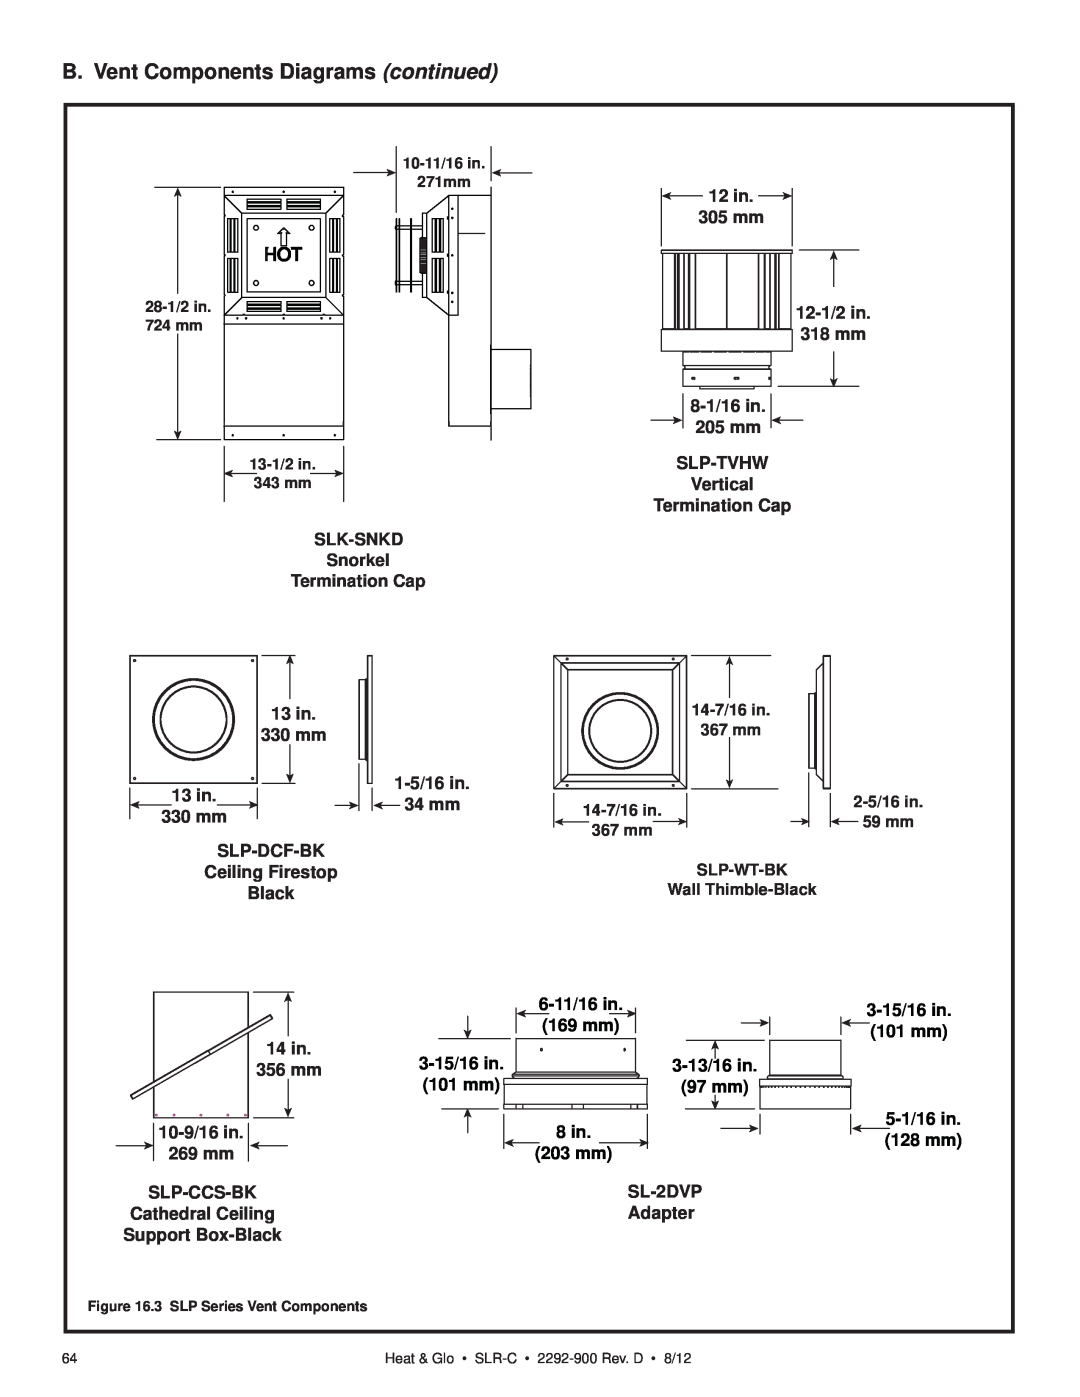 Heat & Glo LifeStyle SLR-C (COSMO) B. Vent Components Diagrams continued, 6-11/16in, 3-15/16in, 169 mm, 101 mm, 3-13/16in 